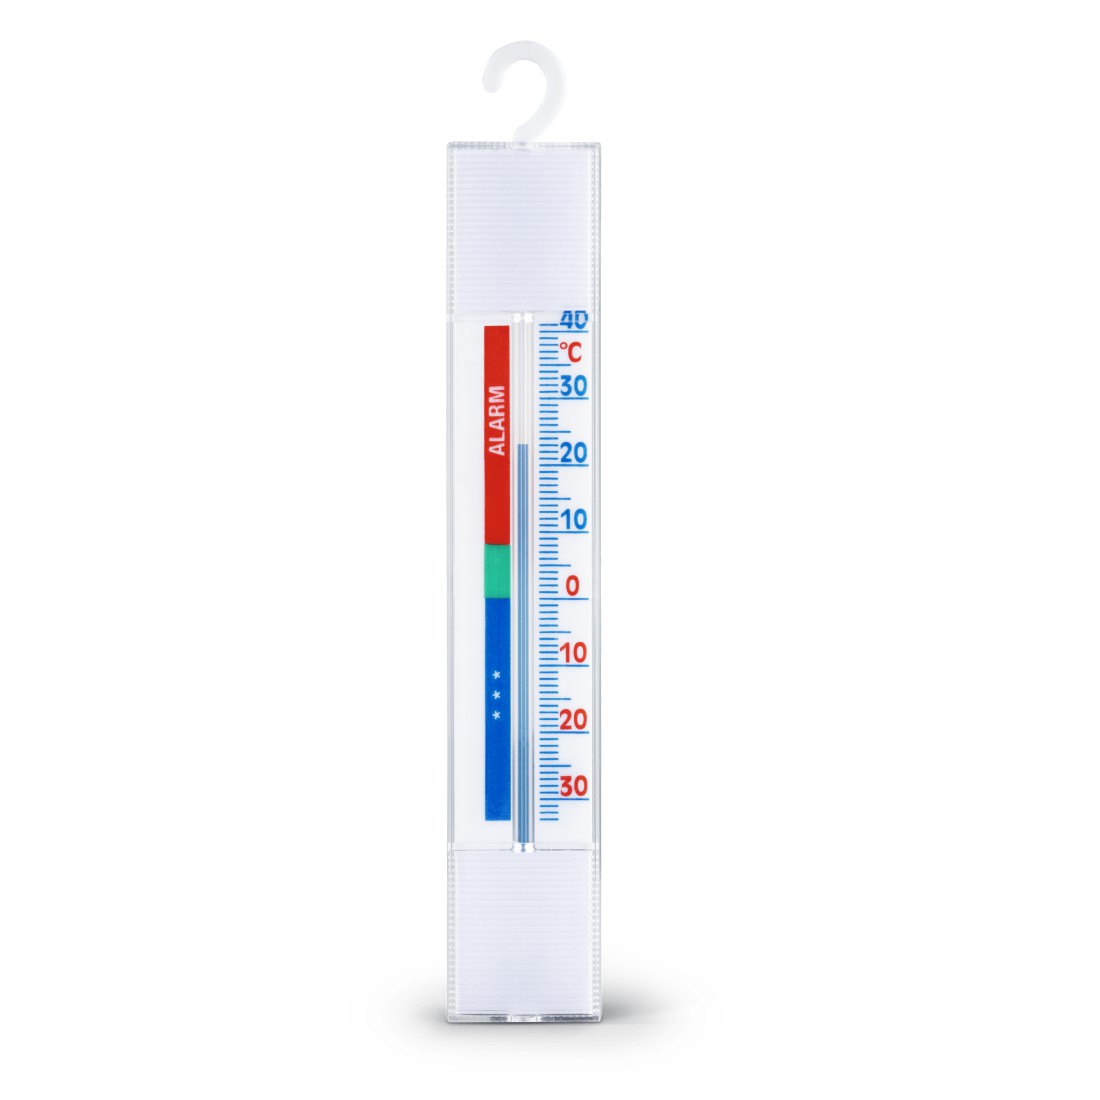 abx High-Res Image - Xavax, Analogue Thermometer for Refrigerator, Freezer and Chest Freezer